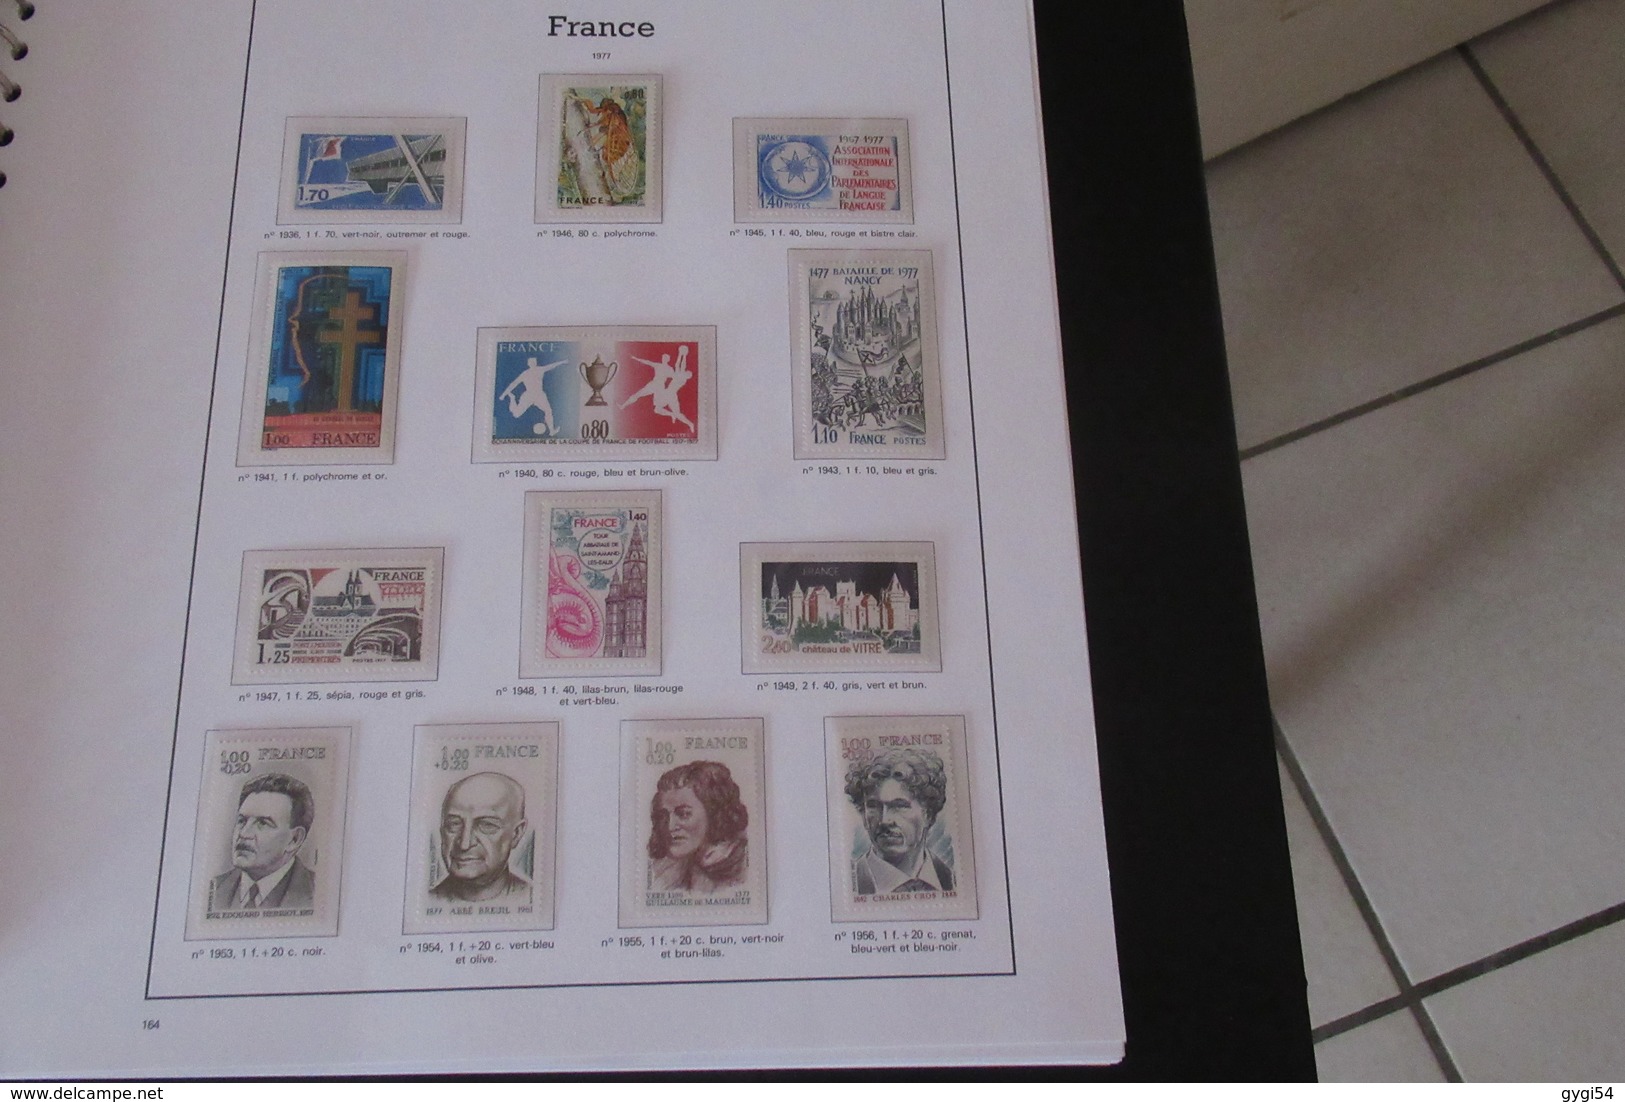 Album  yt  luxe 1970 à 1978 timbres poste complet  n**  MNH